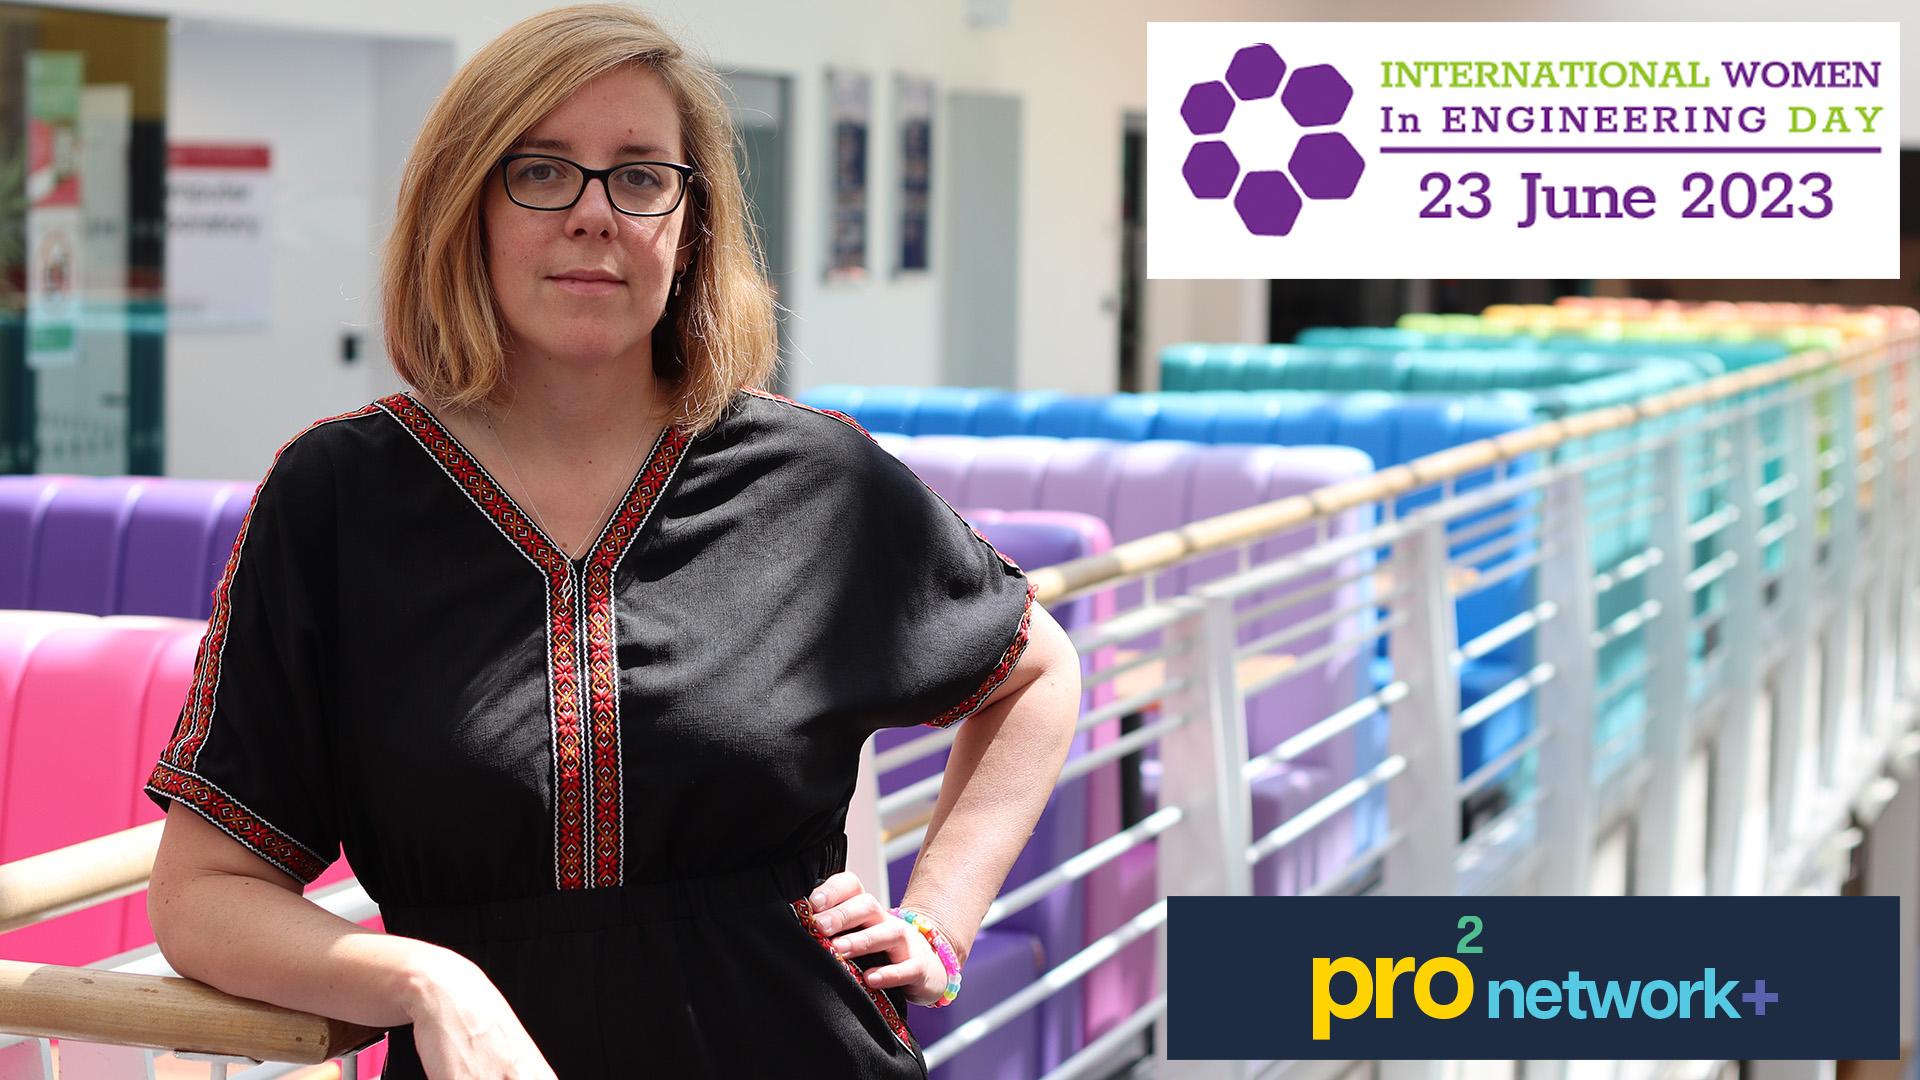 Photo of Anne Roudaut leaning against wooden railing, with a row of colorful booths in the background. The International Women In Engineering Day appears in the top right and the prosquared network+ logo in the bottom right.